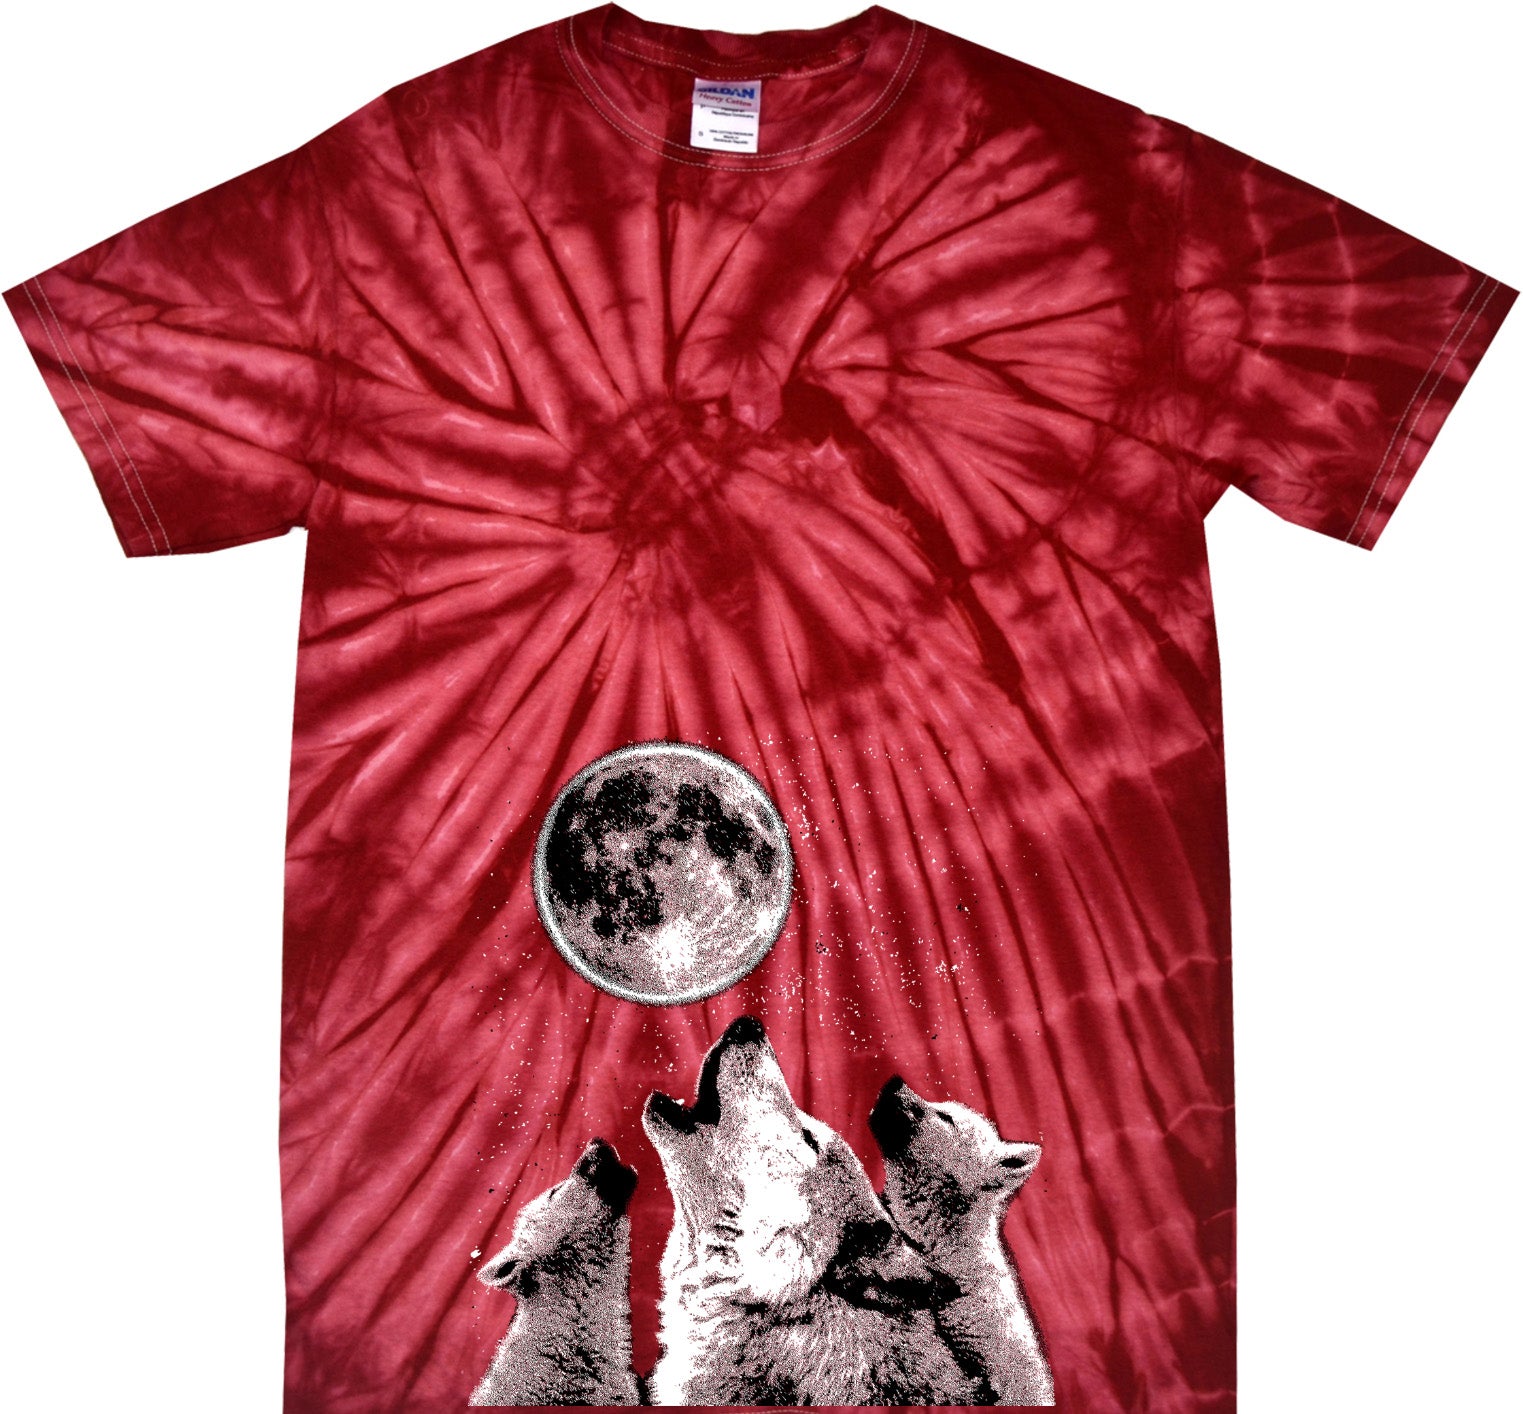 Wolves T-shirt Howling at the Moon Spider Tie Dye Tee